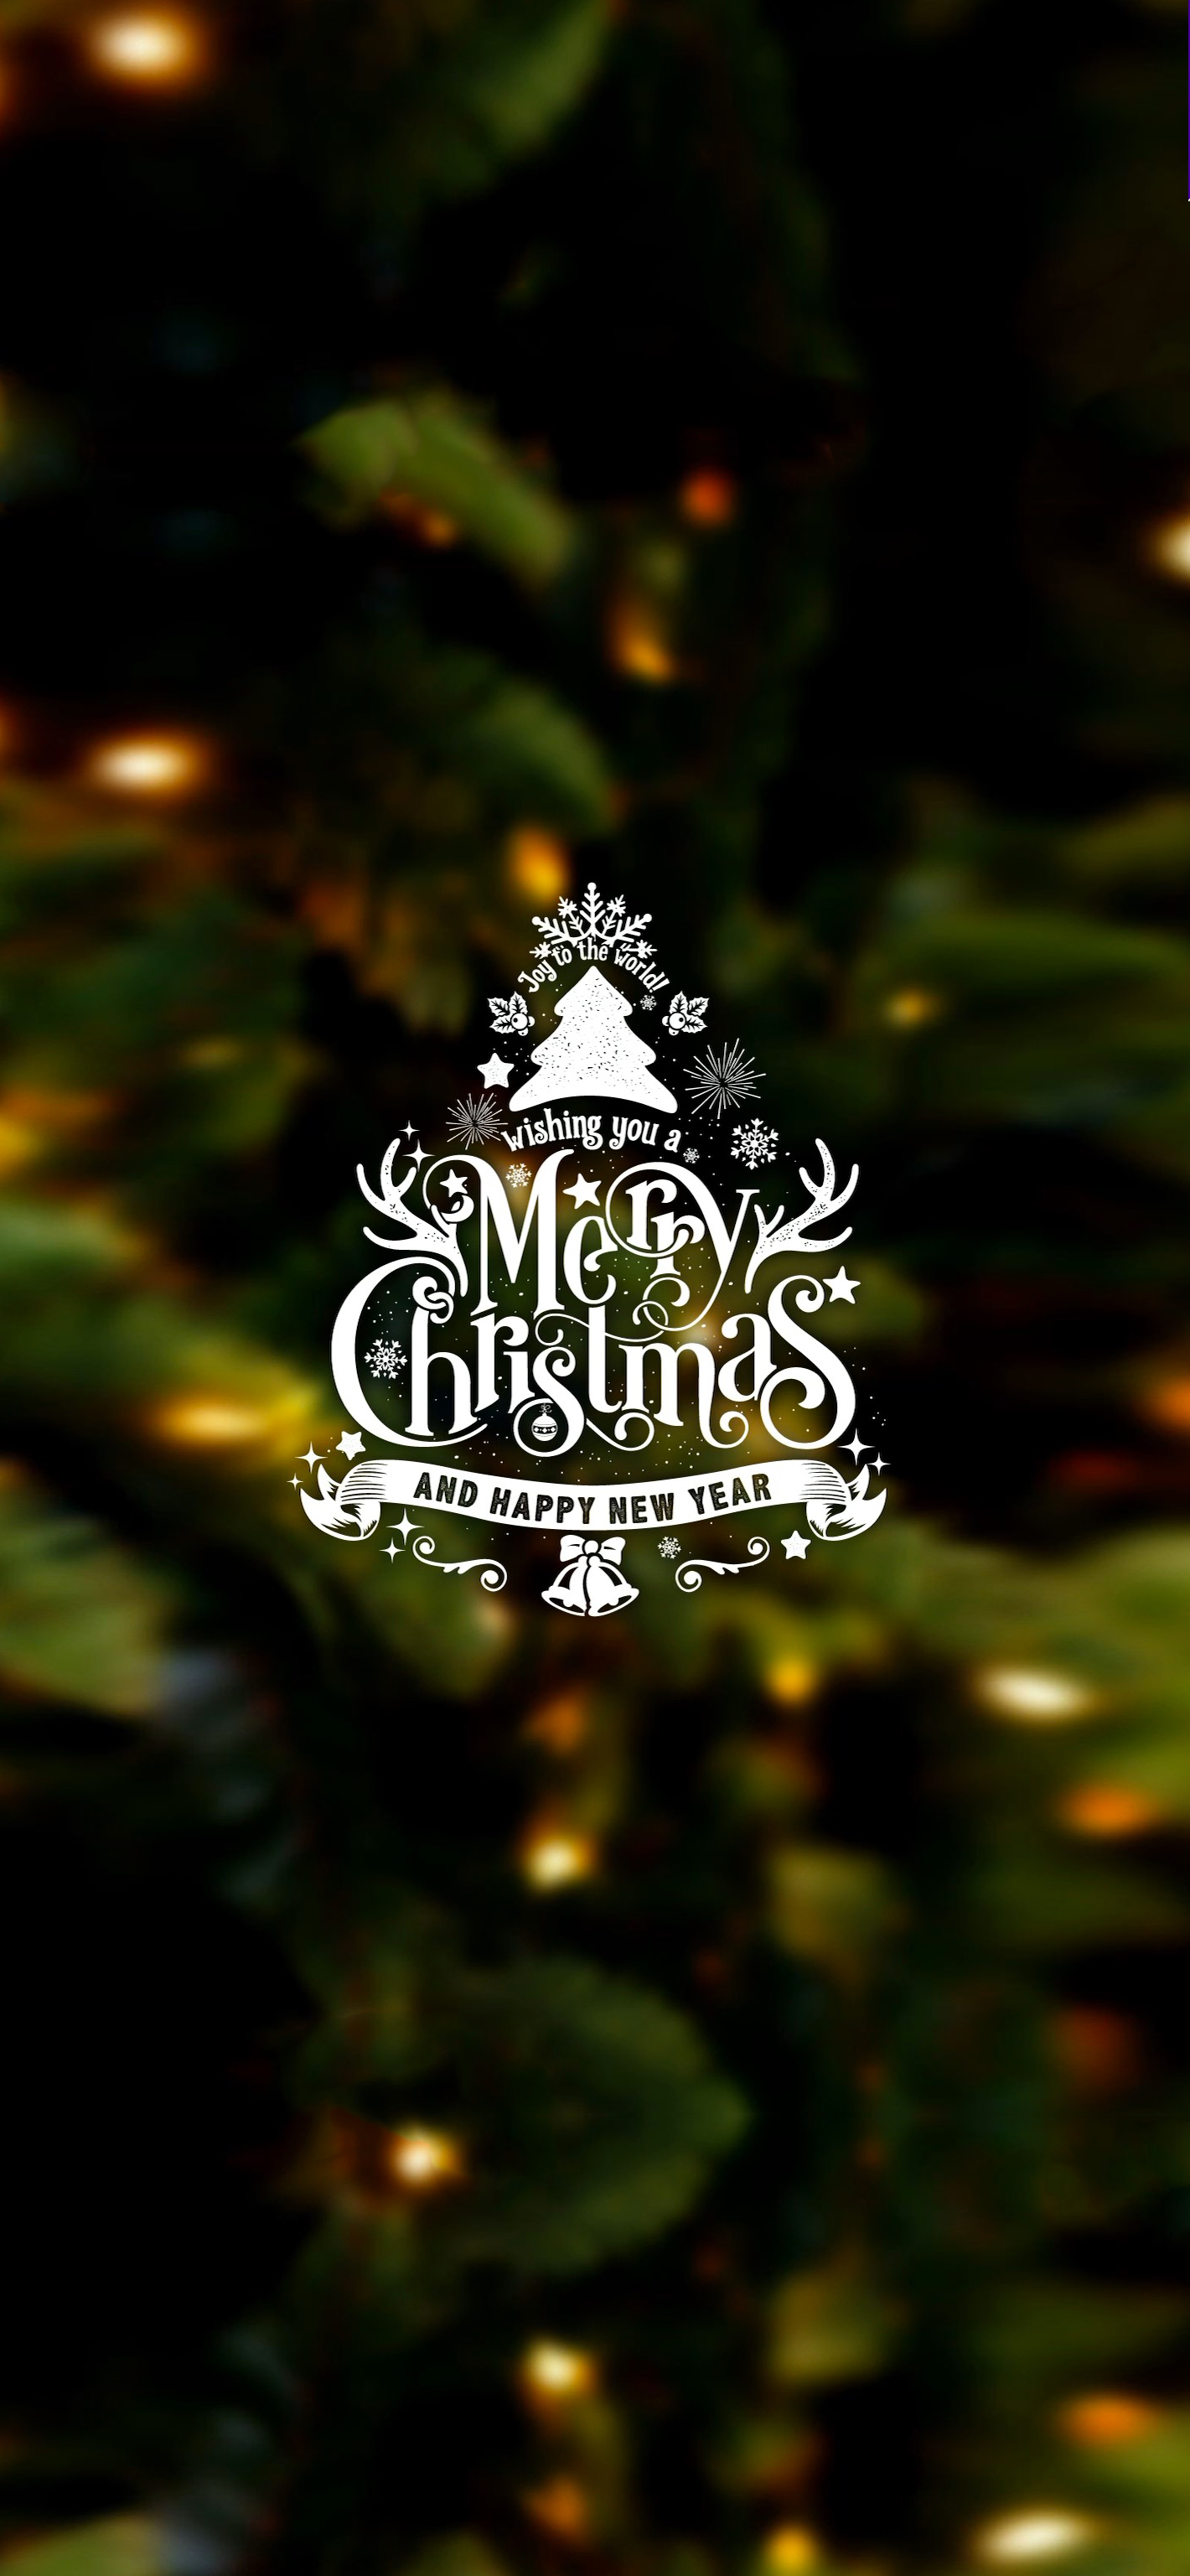 Merry Christmas and Happy New Year 2021 | LIVE Wallpaper - Wallpapers  Central